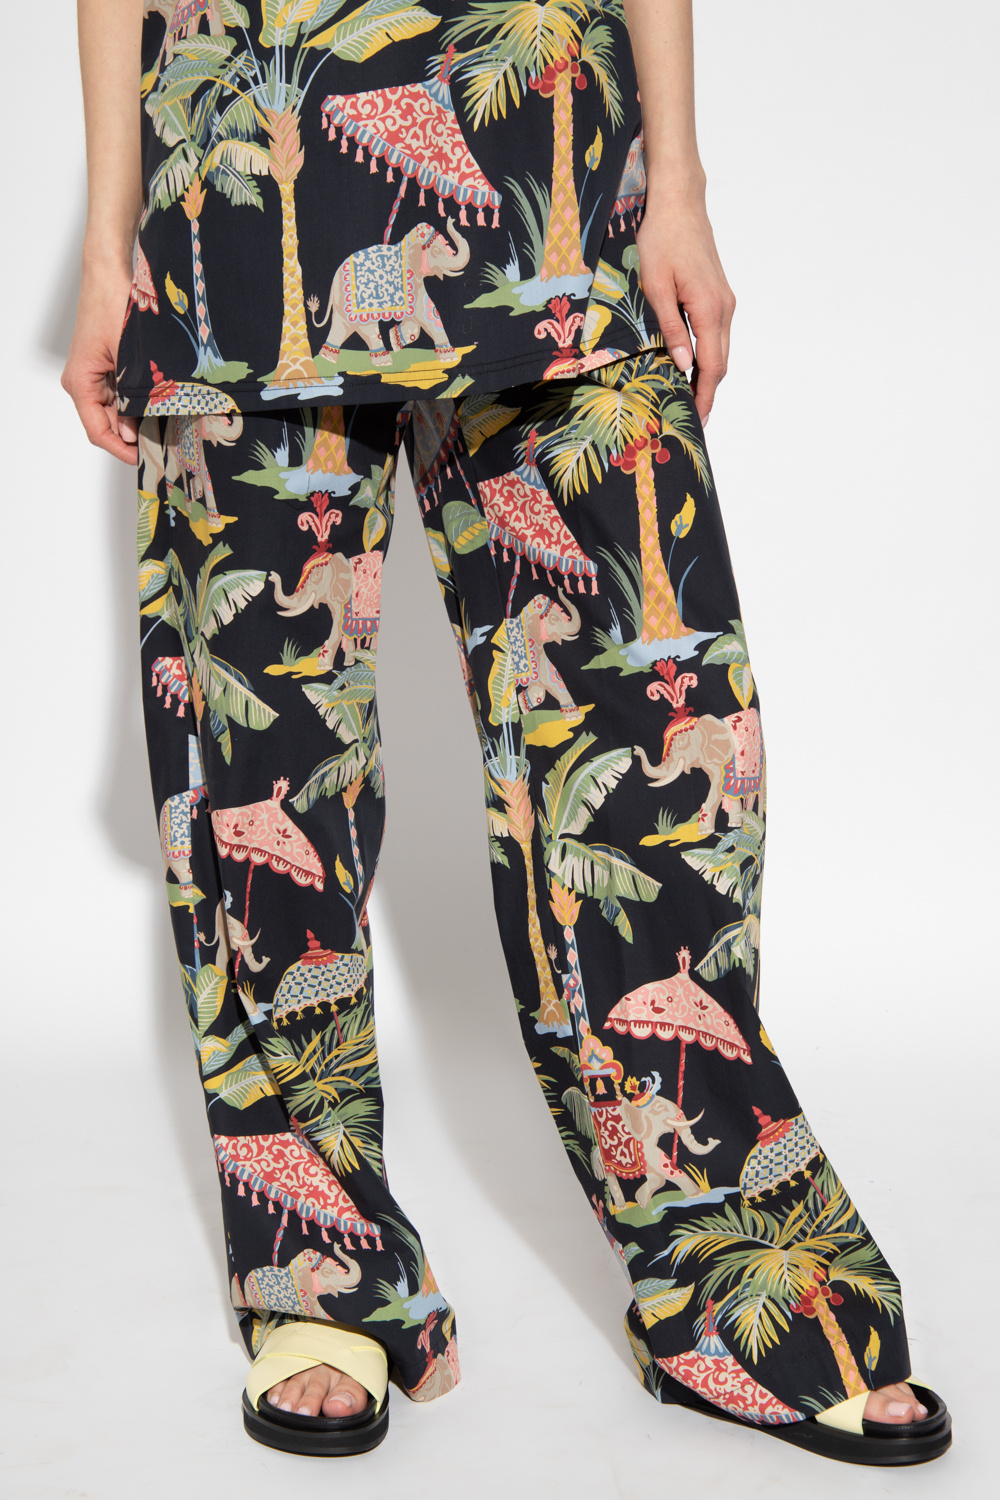 Red valentino compact Wide leg trousers